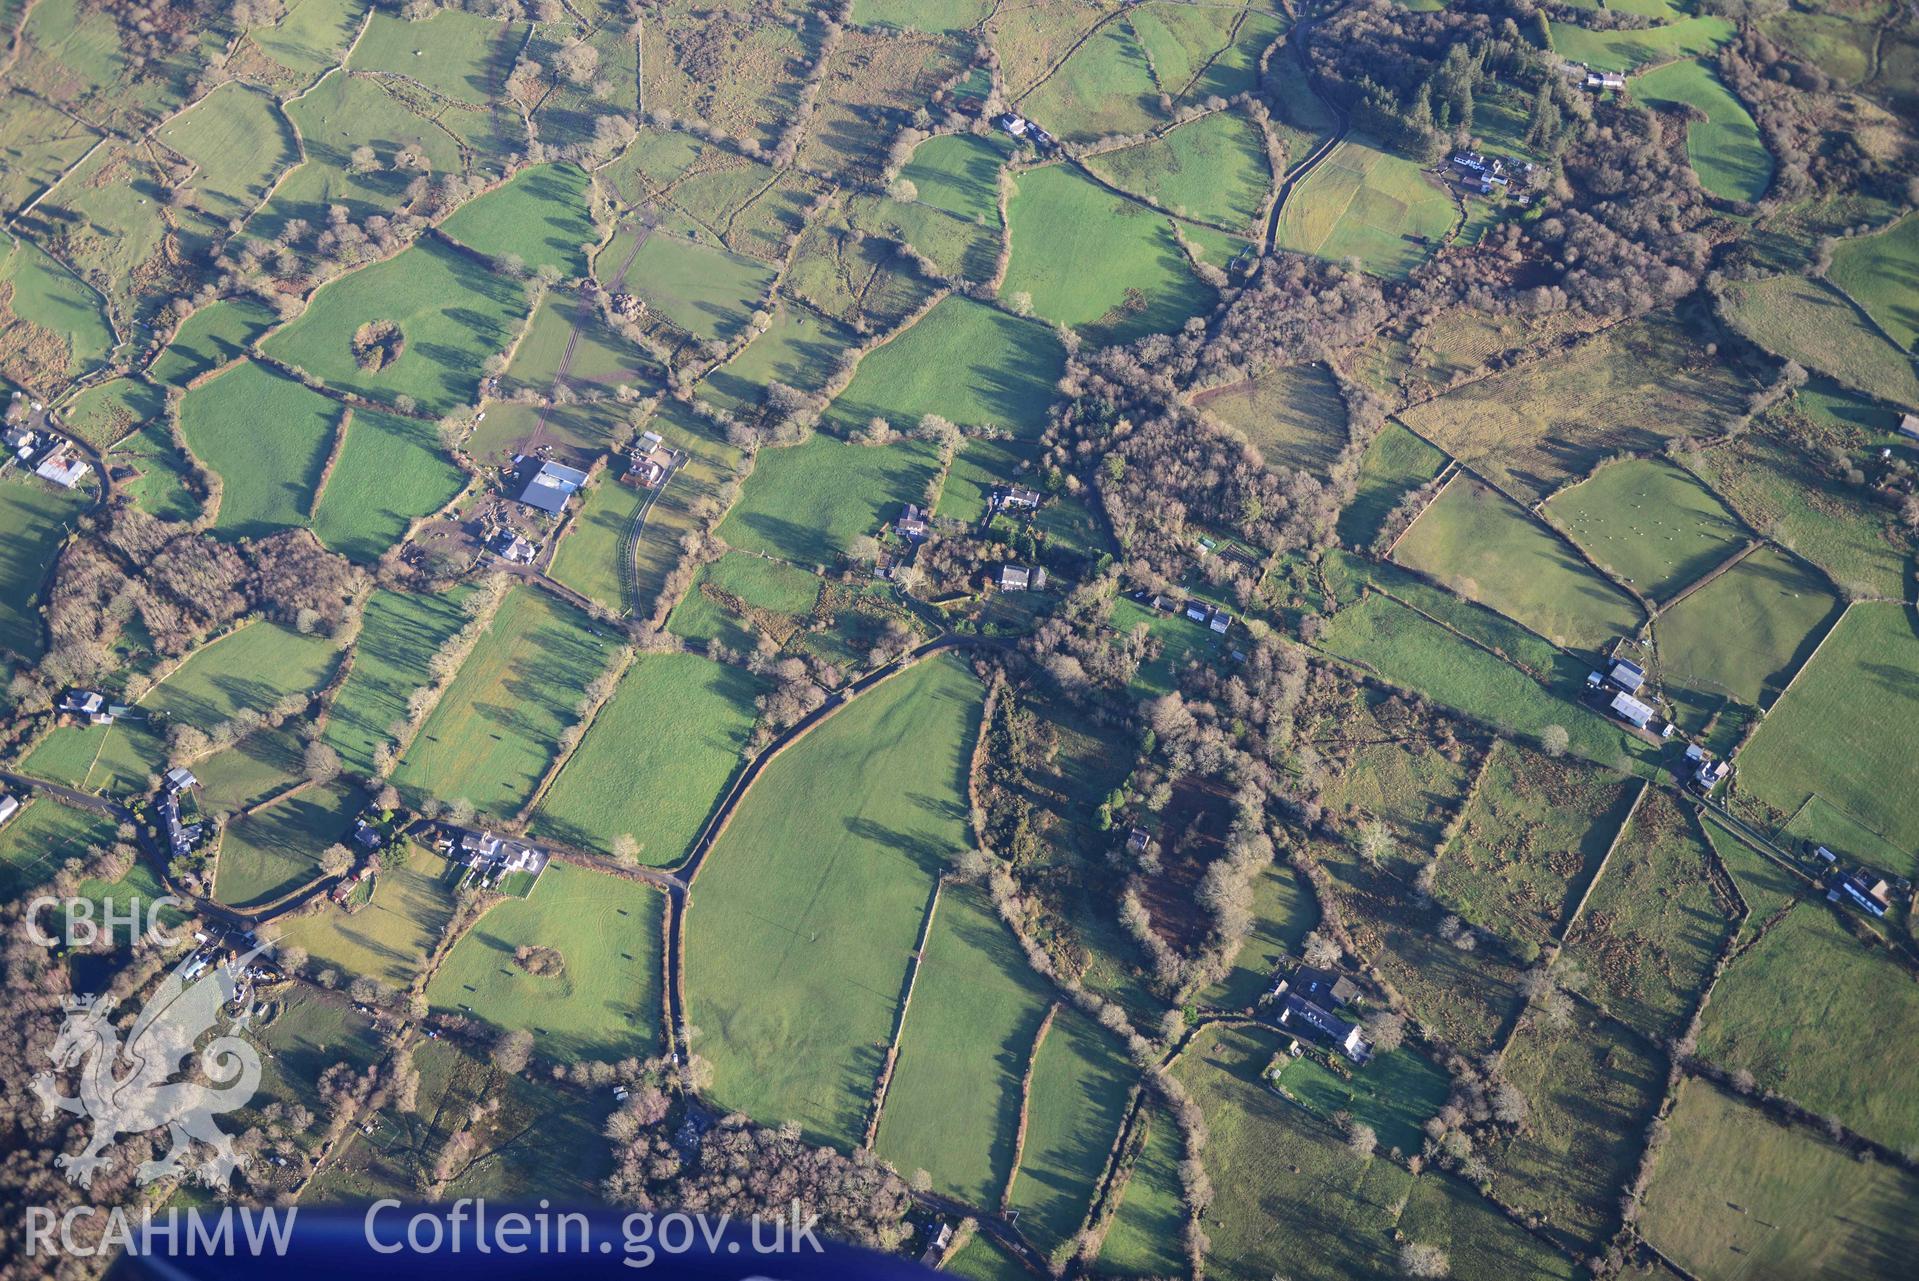 Oblique aerial photograph of the landscape near Tryfan Hall, with Tryfan Mawr and Tryfan Bach, taken from the south east during the Royal Commission’s programme of archaeological aerial reconnaissance by Toby Driver on 12th January 2022